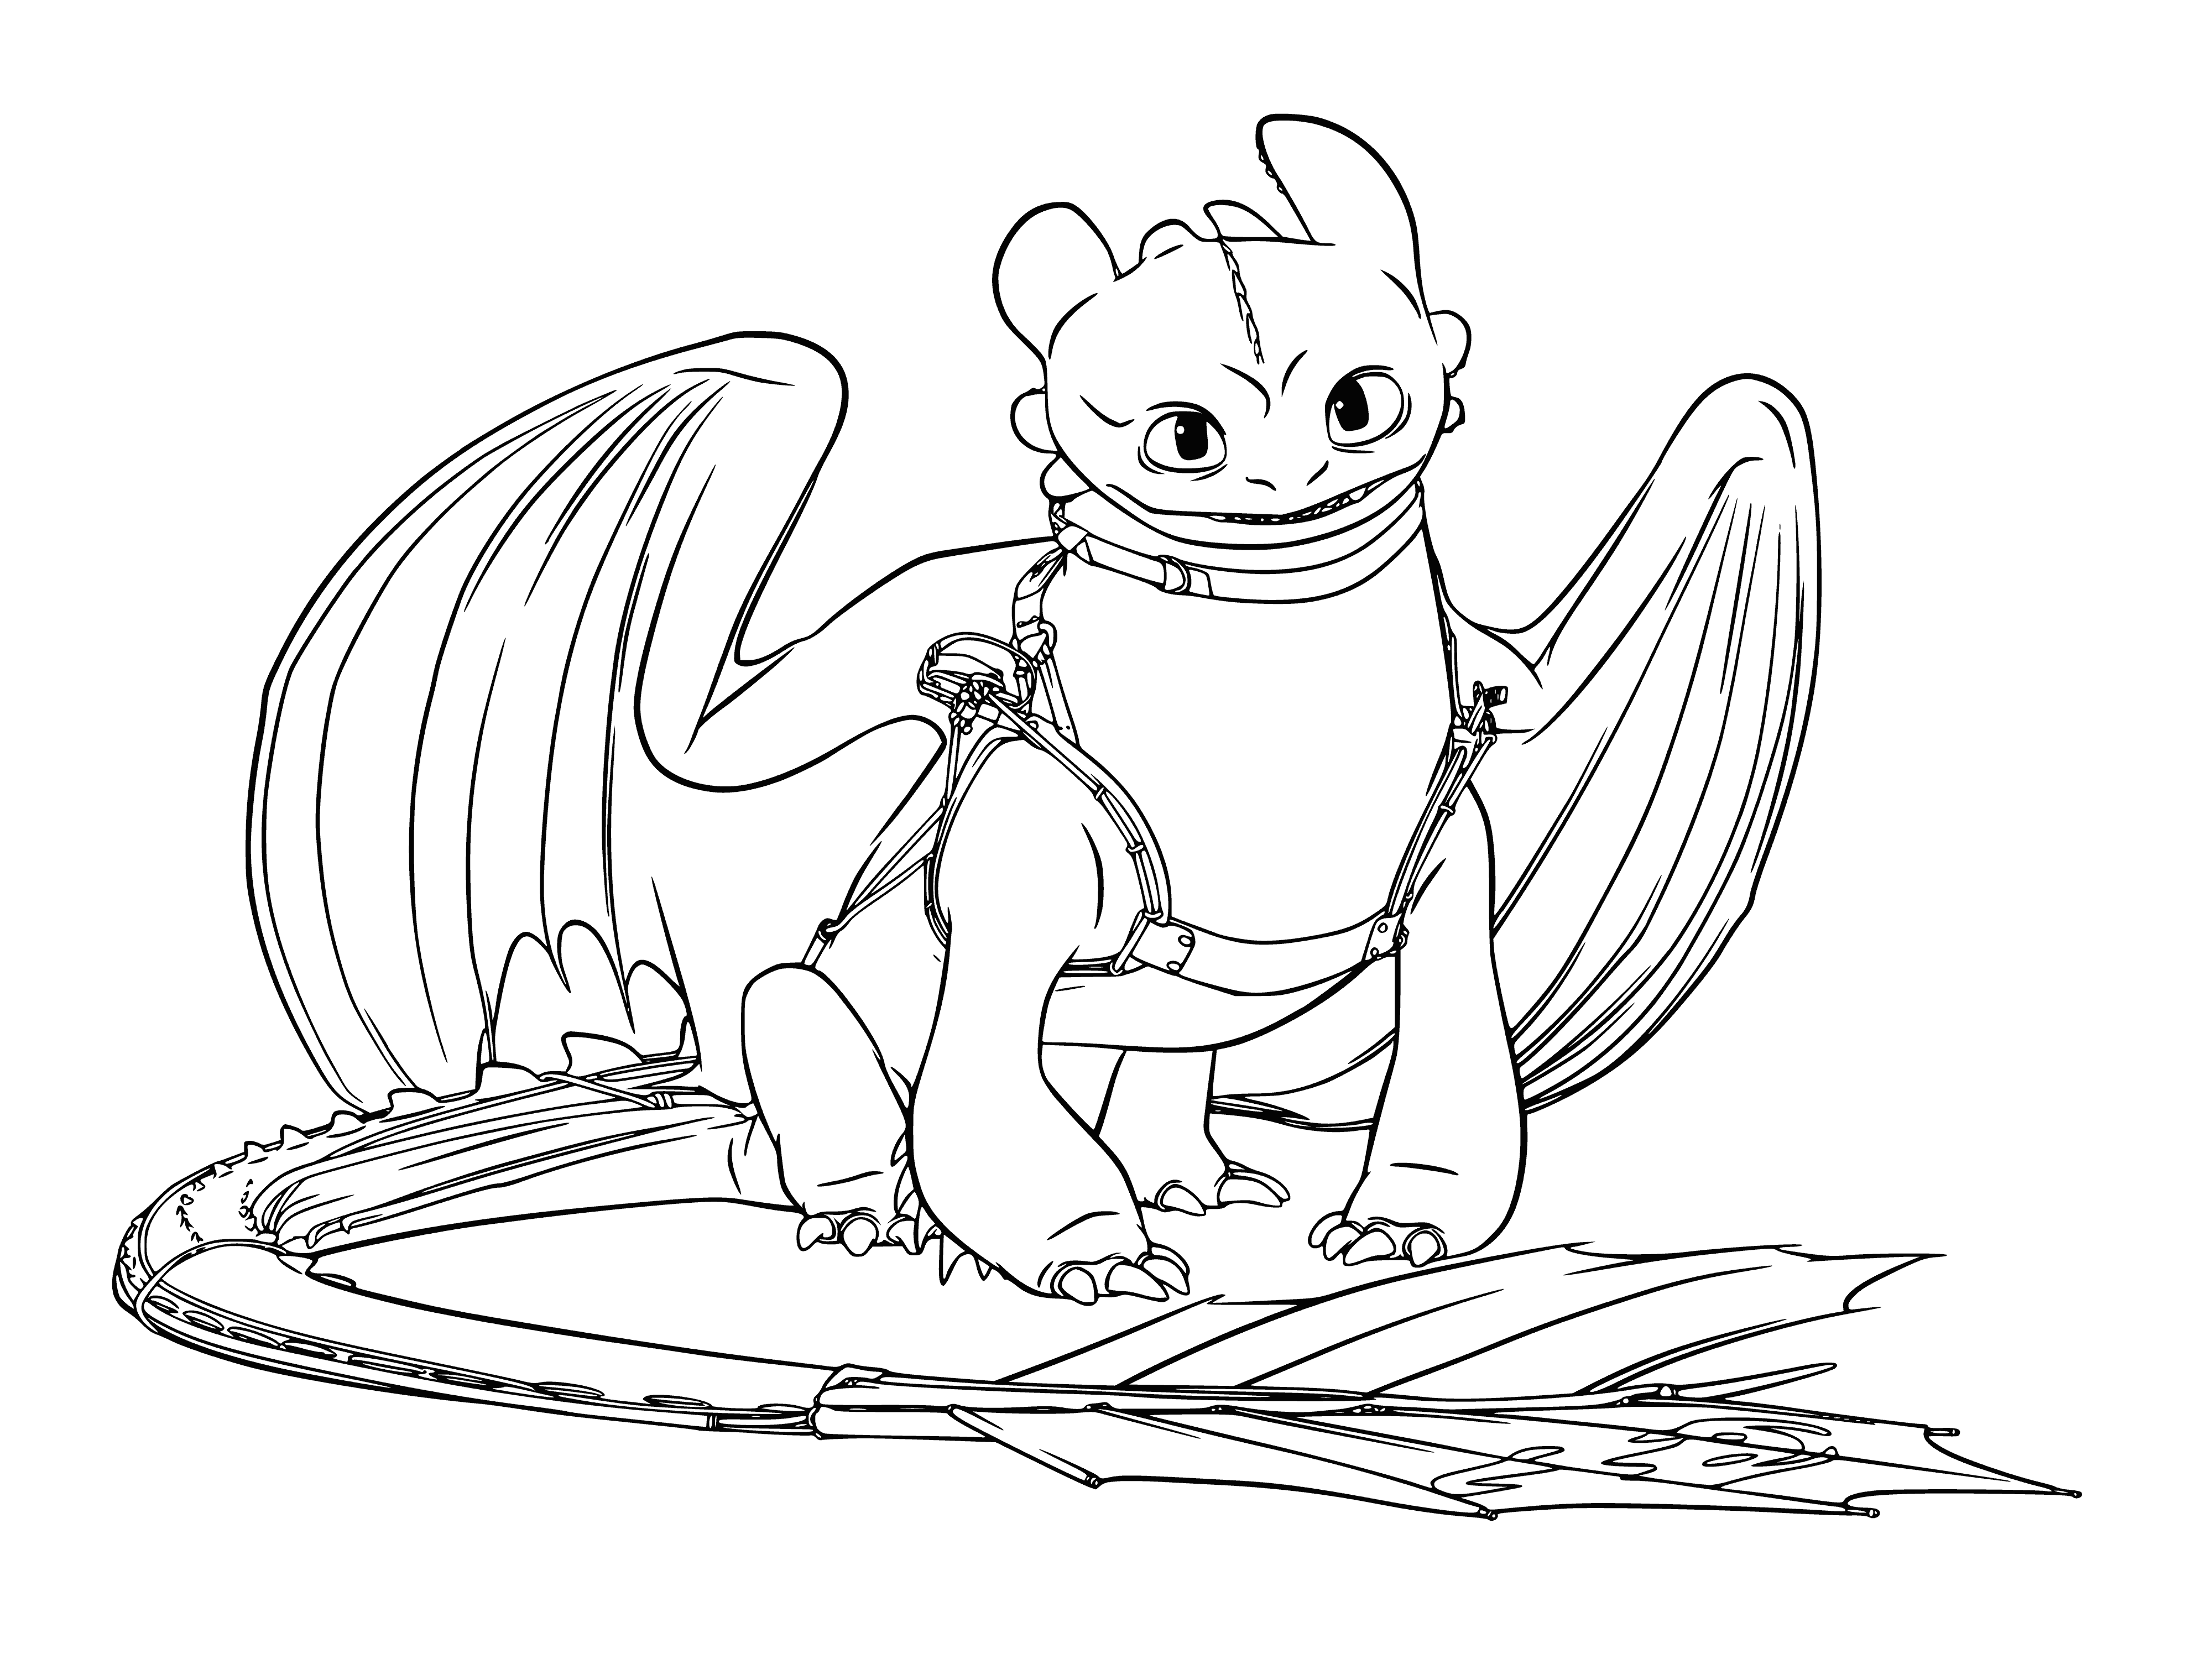 coloring page: Bezzubik is a huge orange dragon with four wings, yellow eyes, and a large mouth full of sharp teeth.